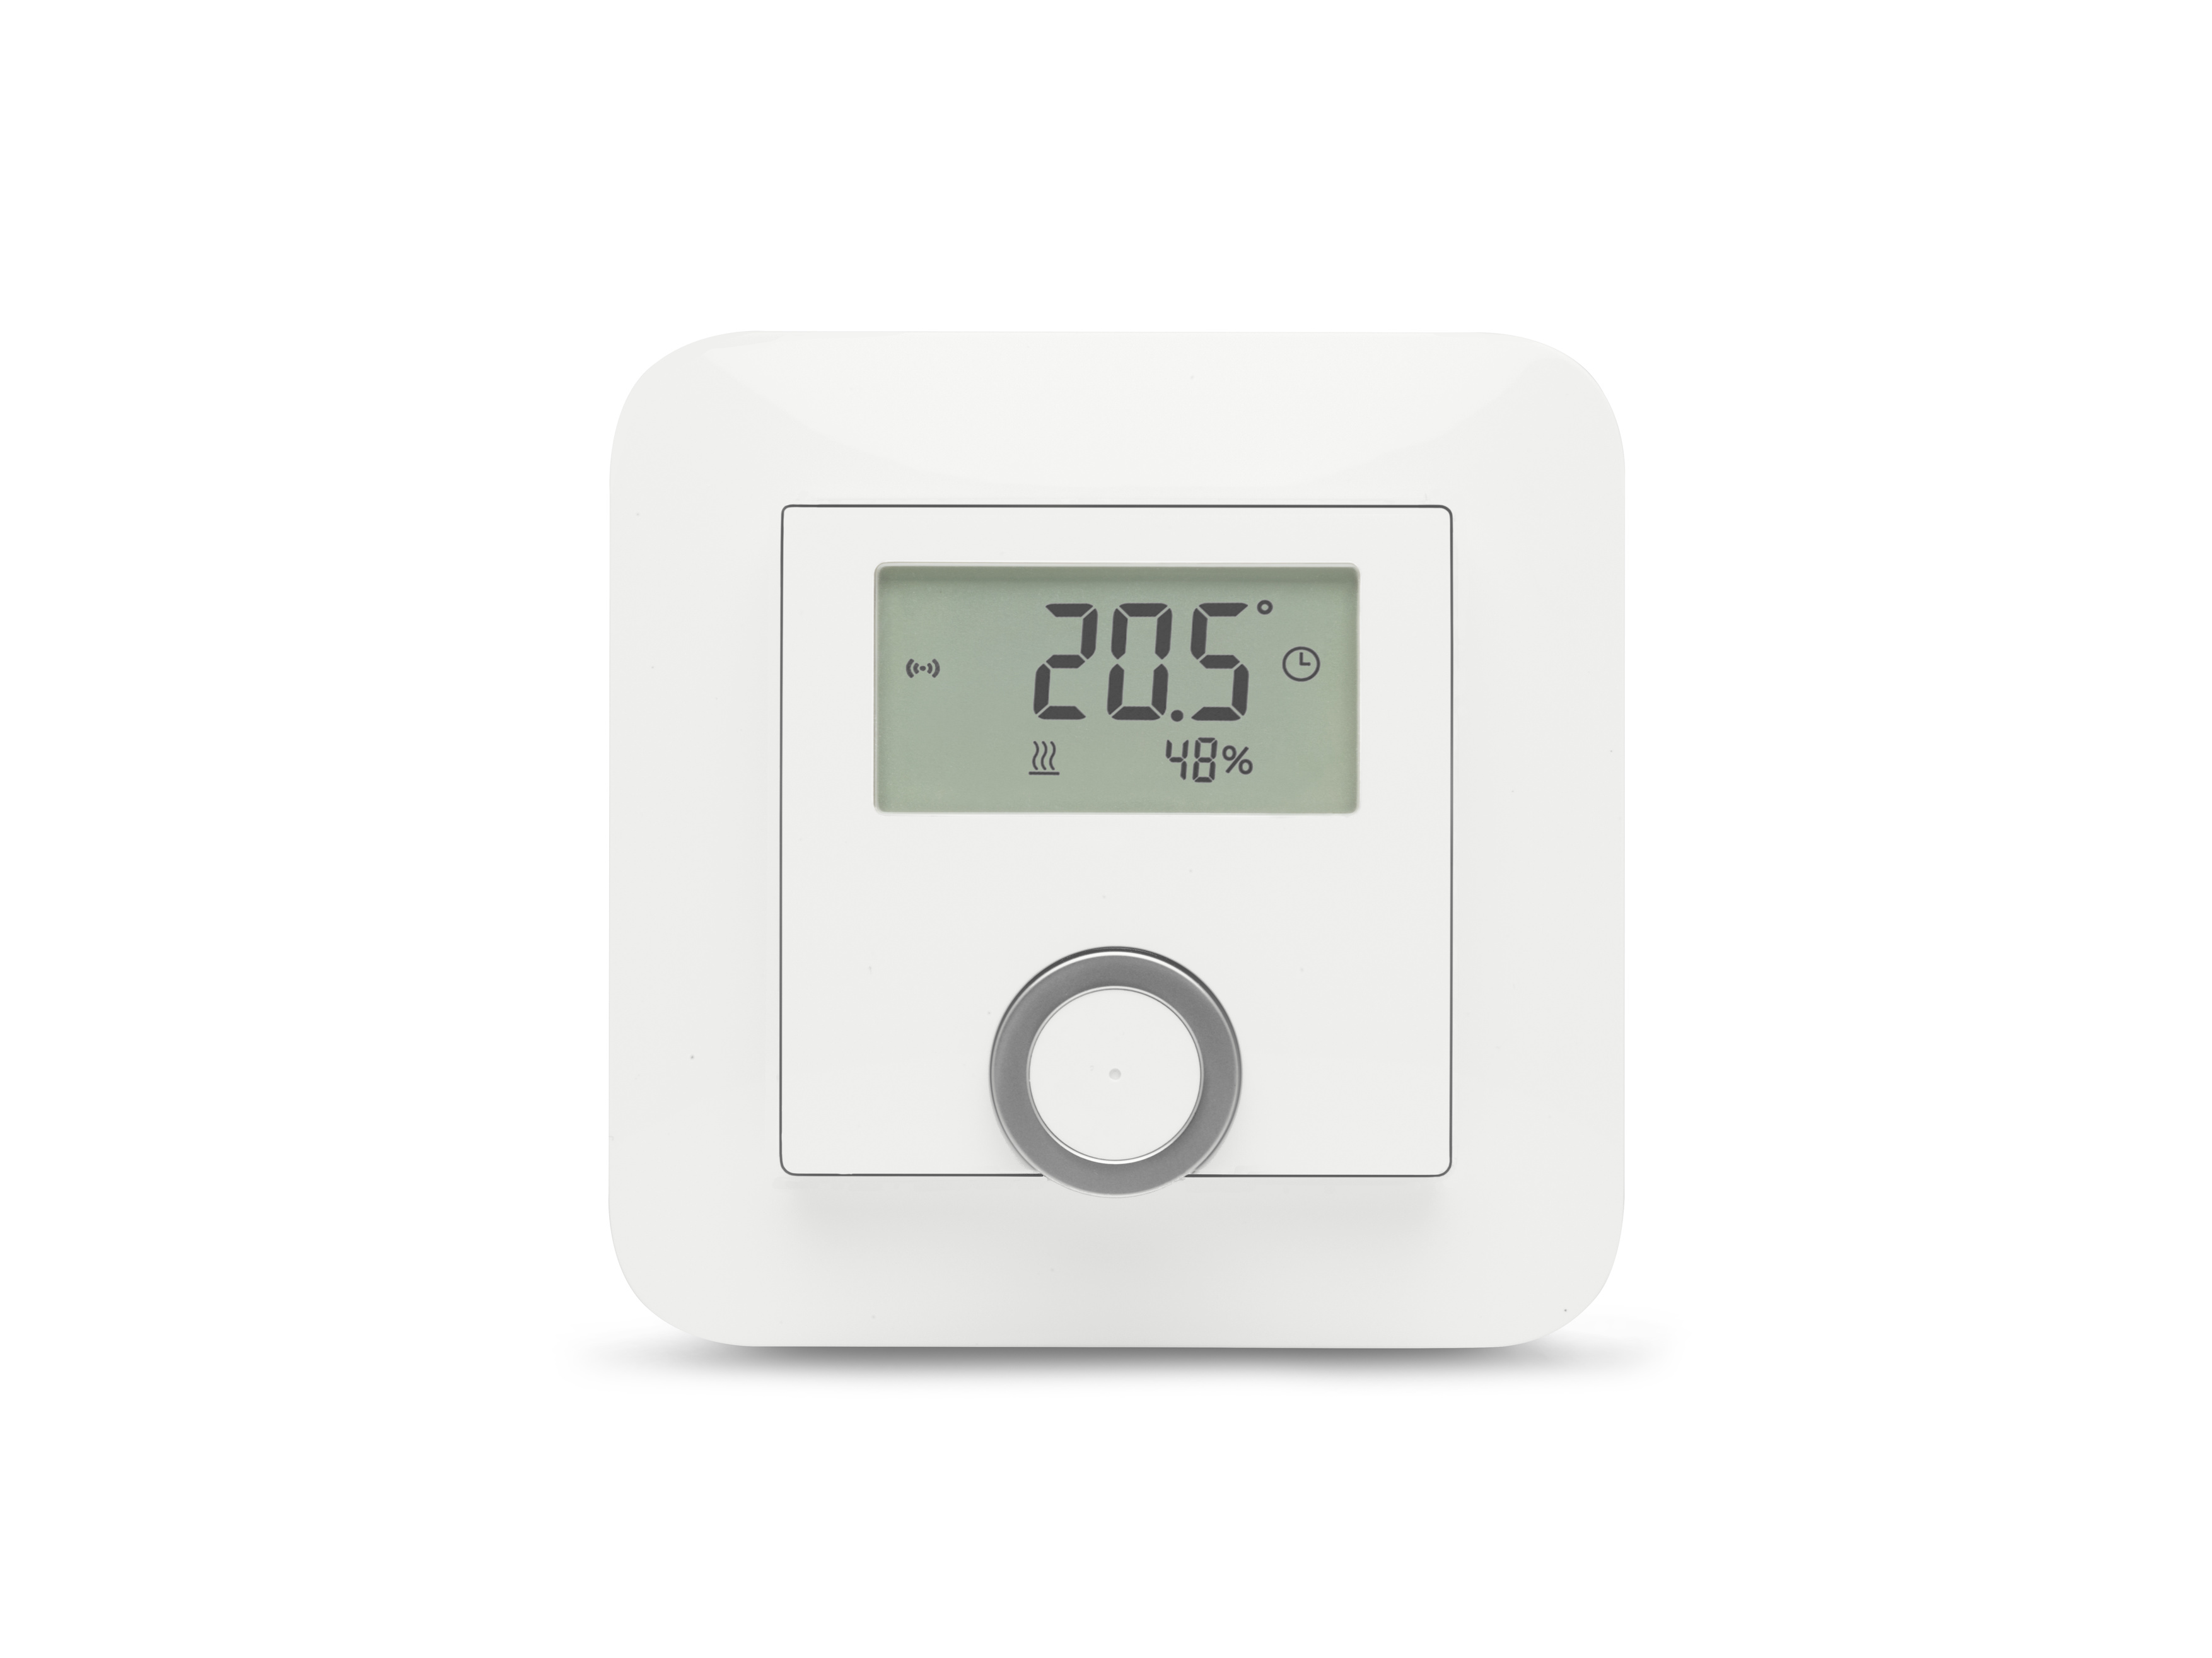 https://www.worcester-bosch.co.uk/img/bosch_individual_thermostat/HOME_230V_Raumthermostat_FBH_stat-Print.jpg